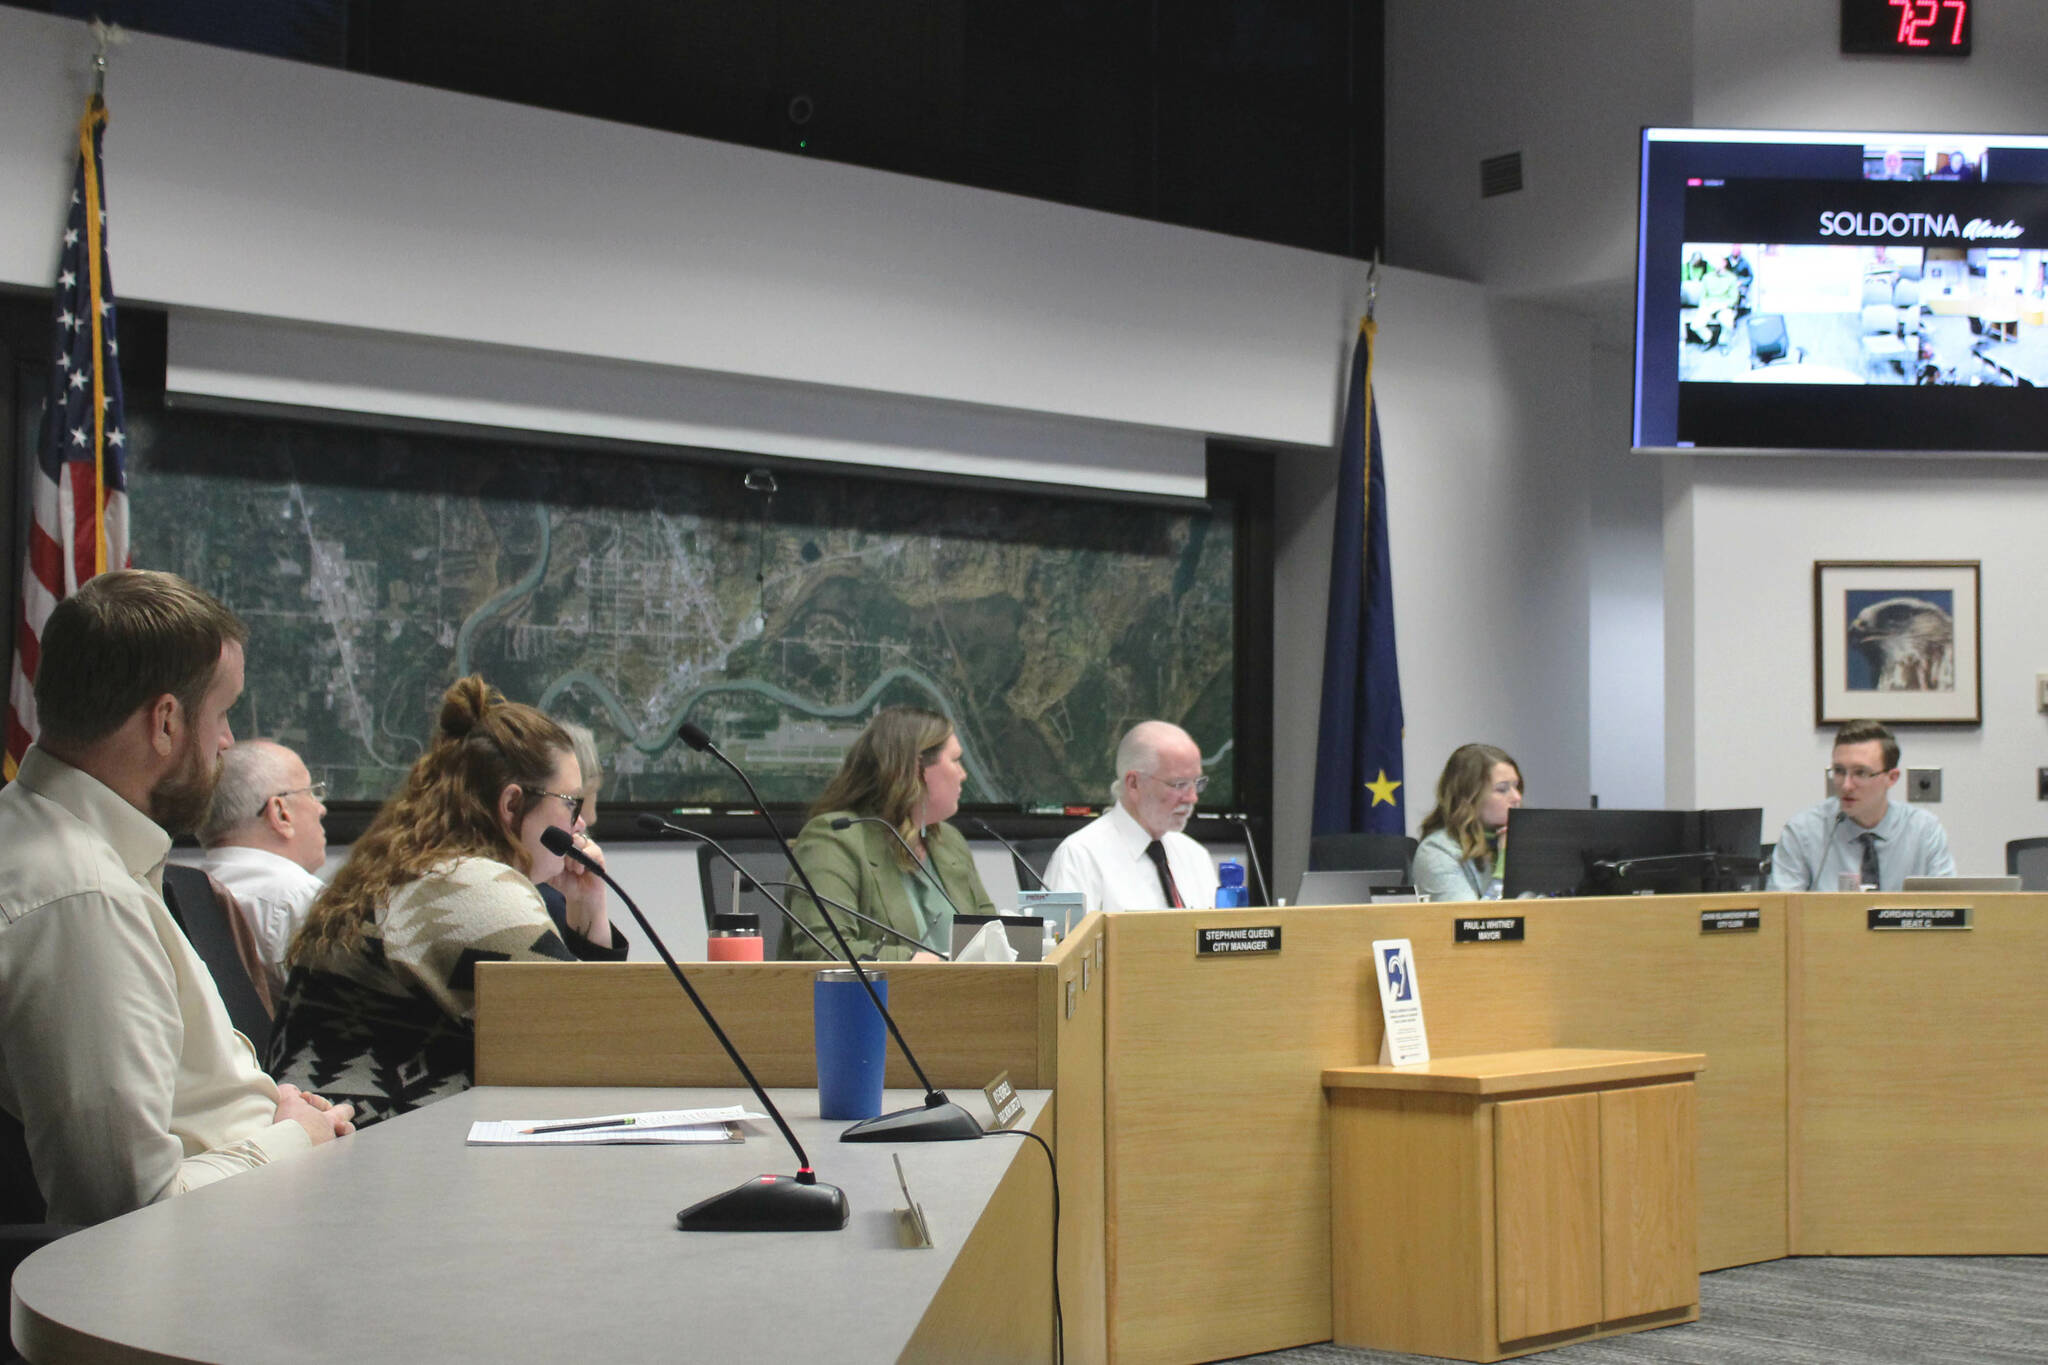 Soldotna City Council member Jordan Chilson, right, speaks during a council meeting on Wednesday, March 8, 2023, in Soldotna, Alaska. (Ashlyn O’Hara/Peninsula Clarion)